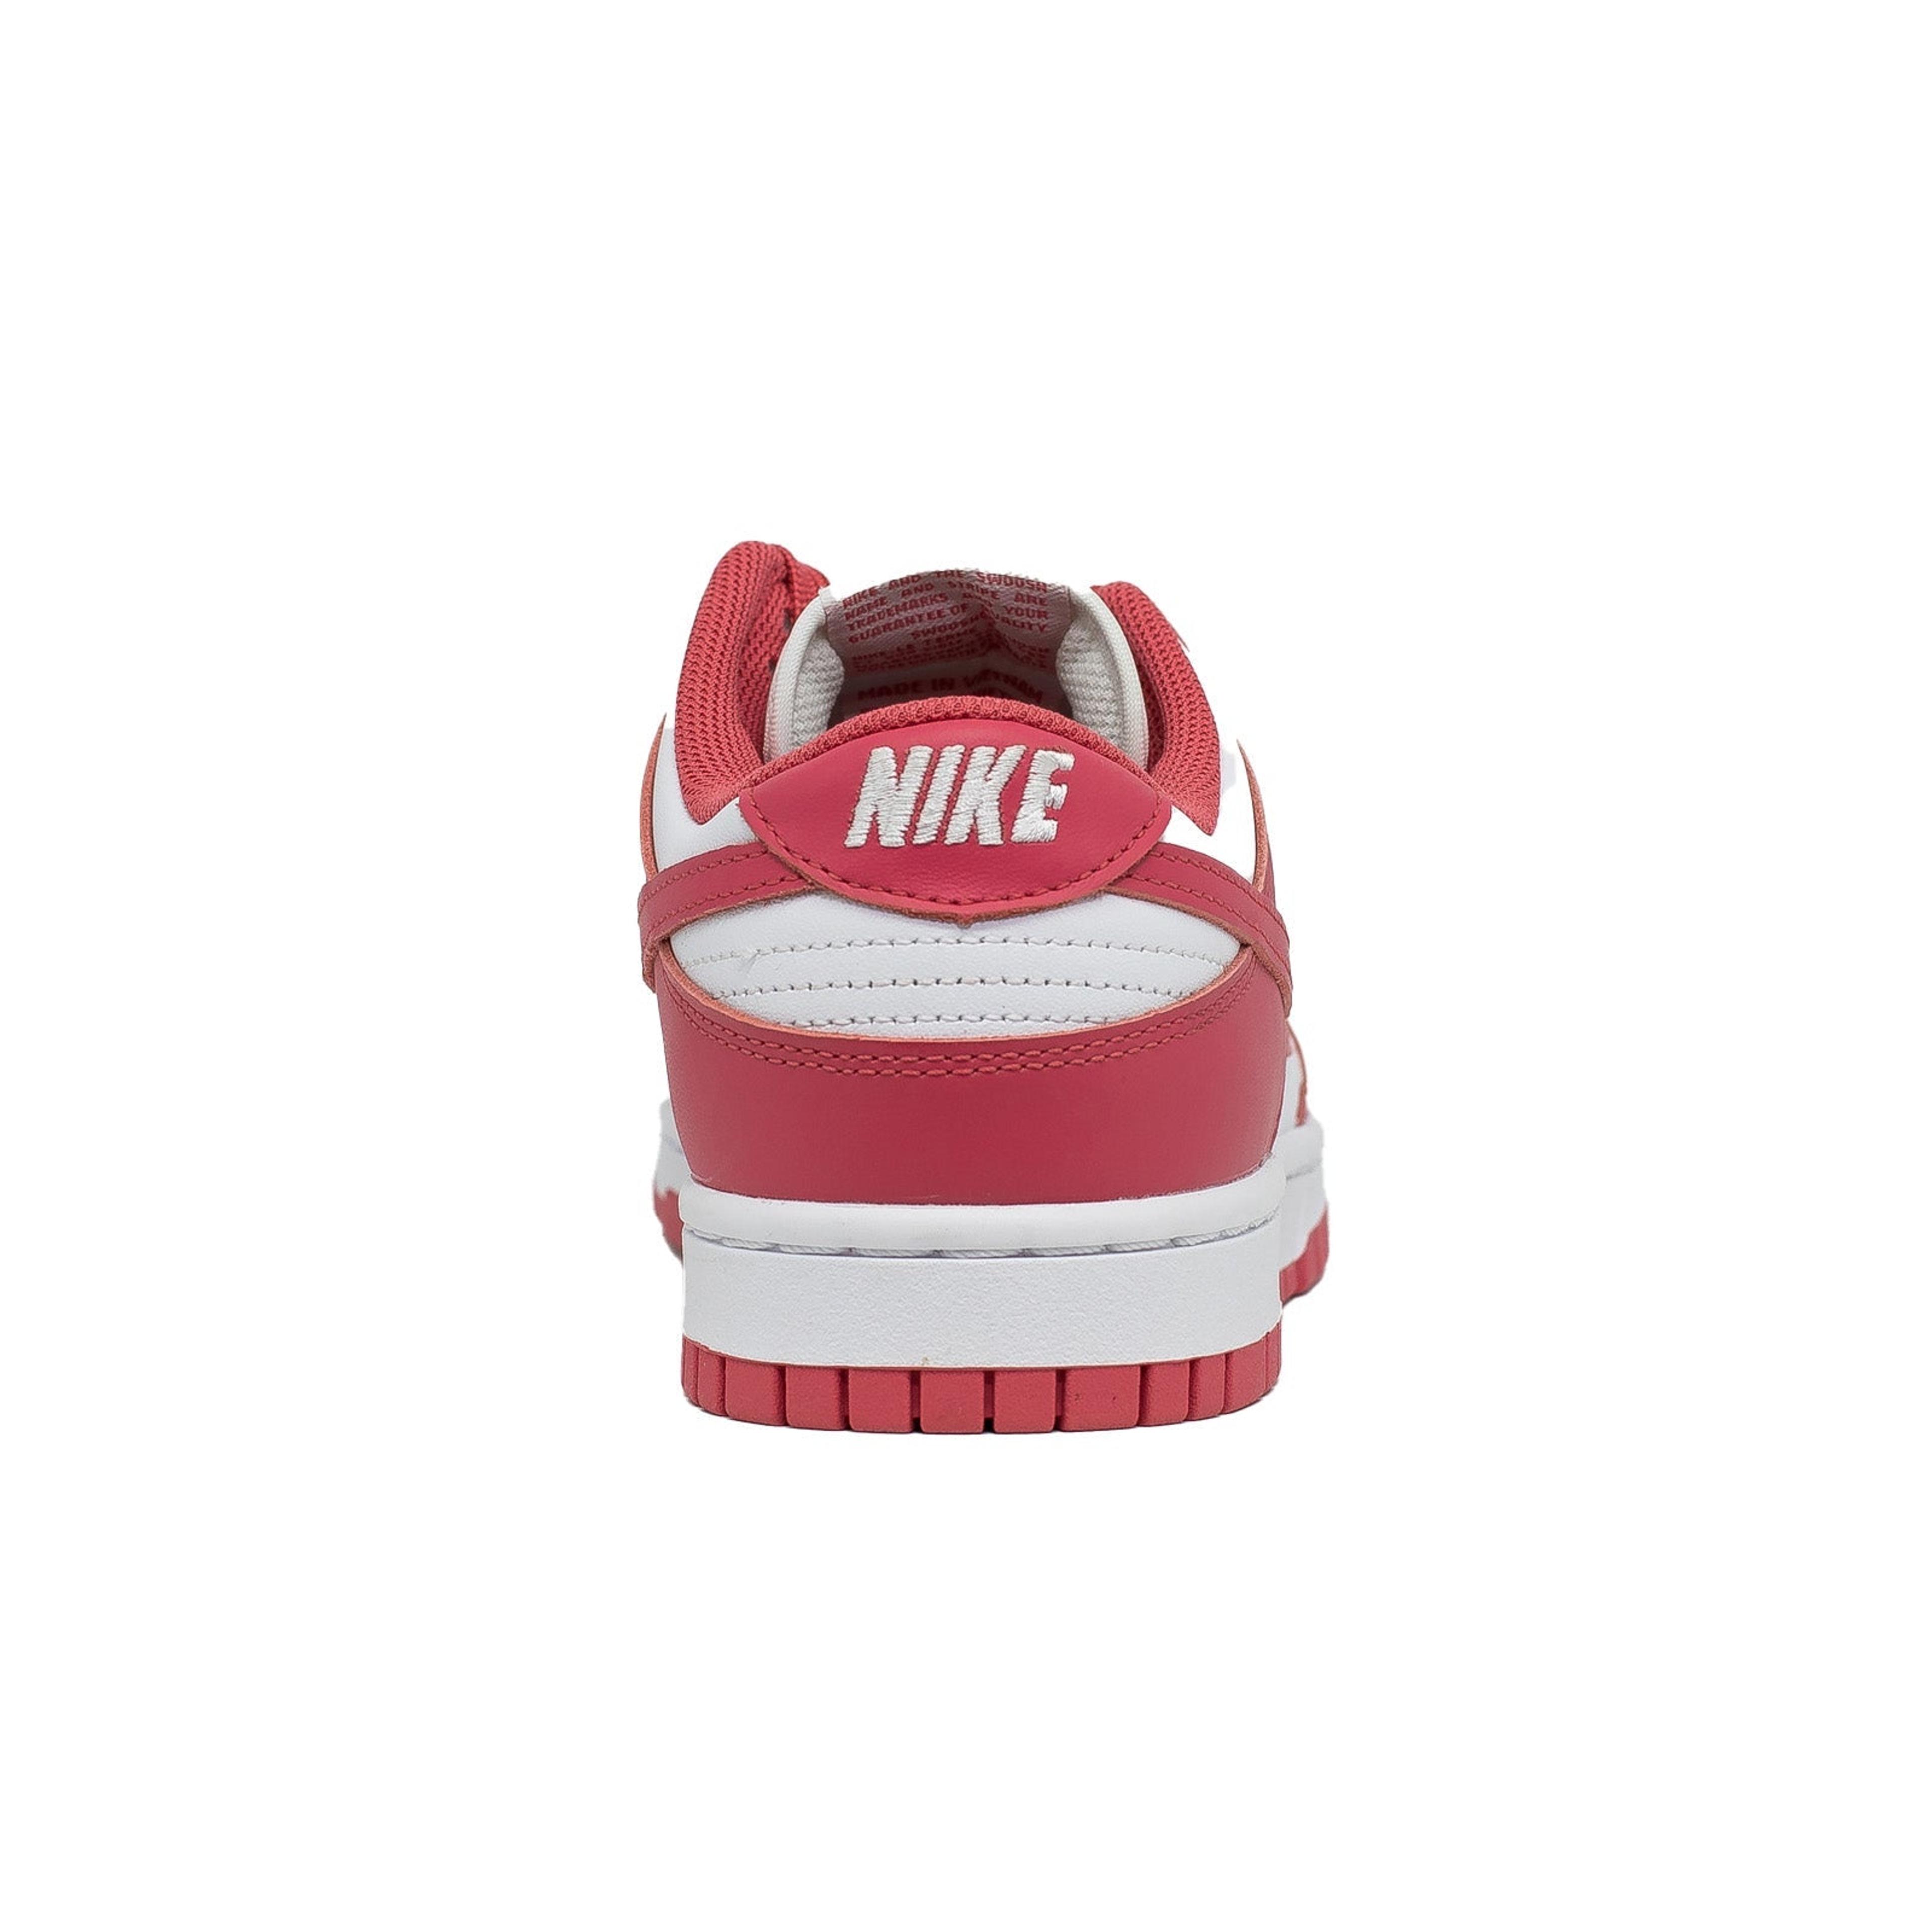 Alternate View 3 of Women's Nike Dunk Low, Archeo Pink